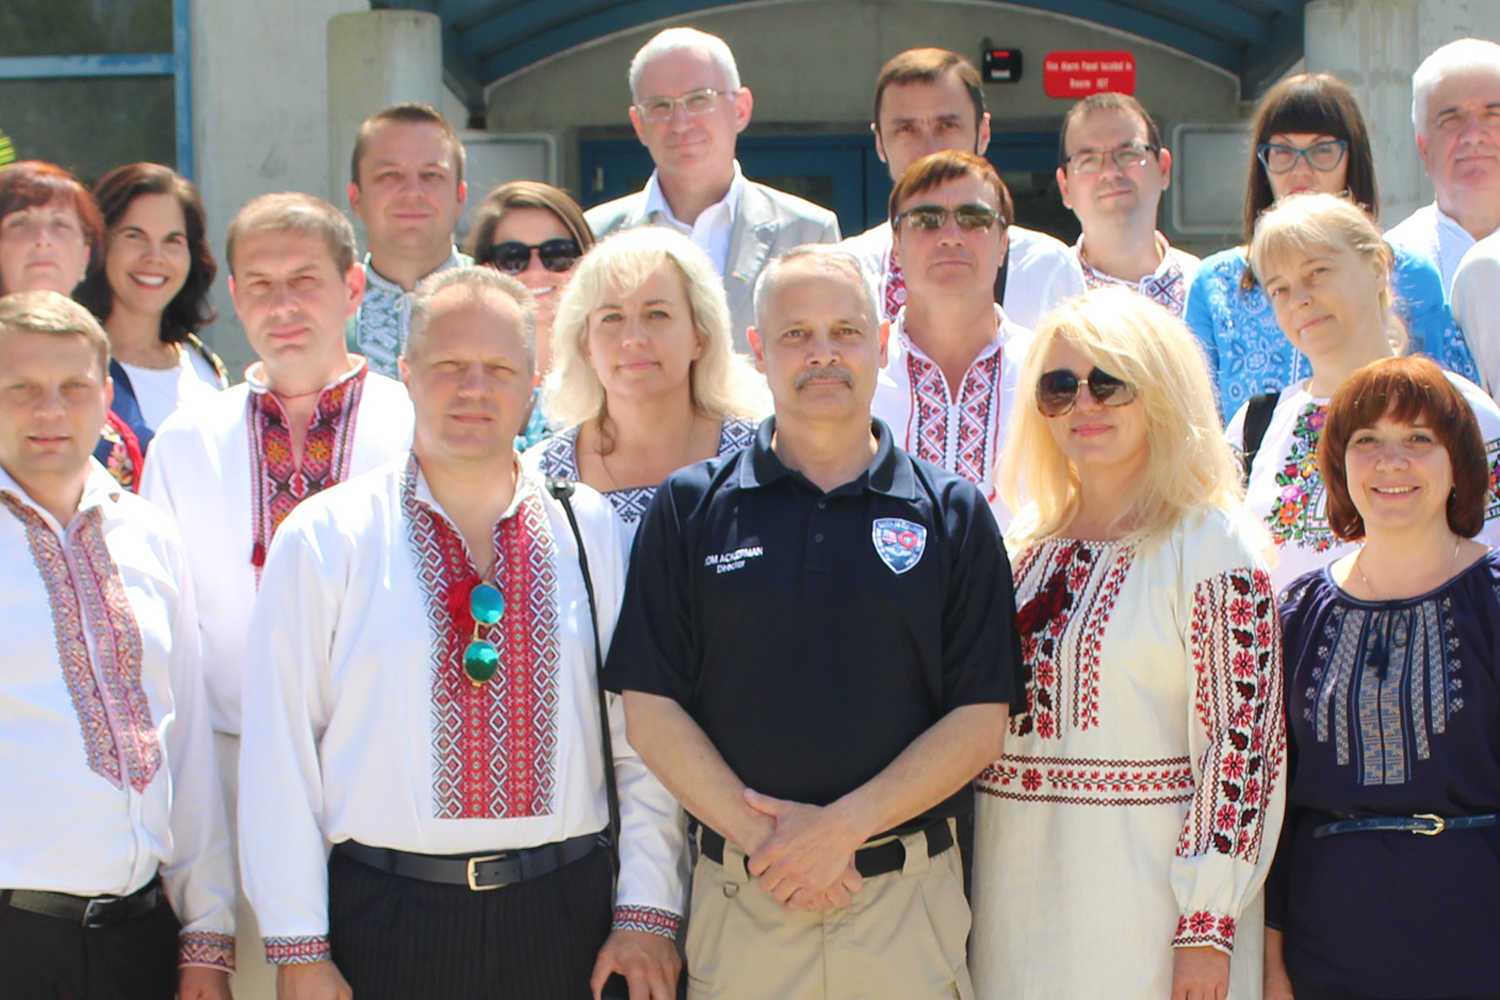 "CCAP Ukraine group photo with the director of public safety at Santa Fe College"